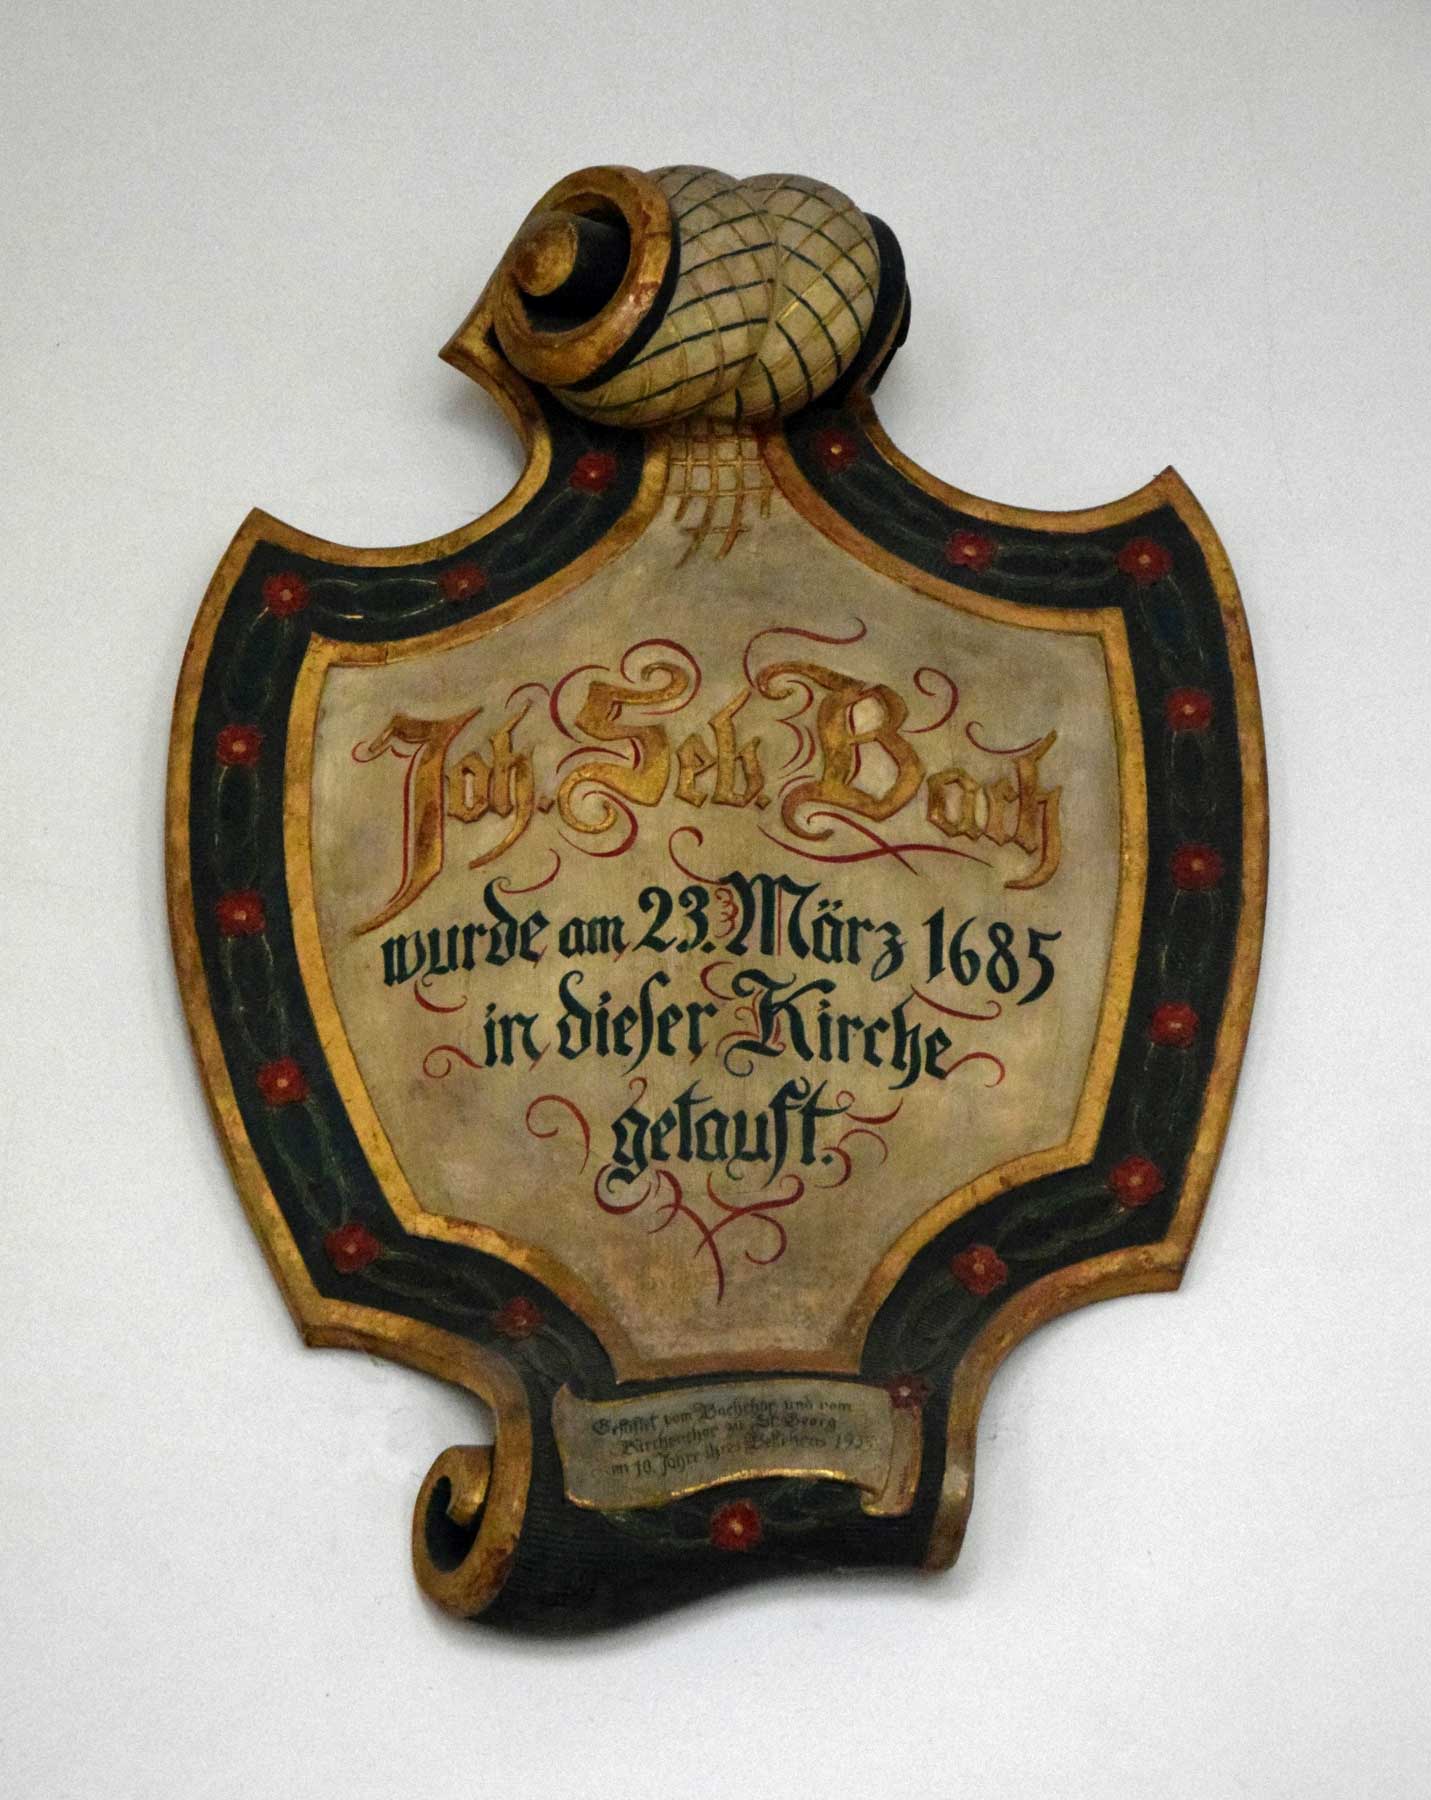 A wooden memorial plate above the entrance portal of the Georgenkirche in Eisenach, commemorating Bach's baptism according to the Julian calendar.